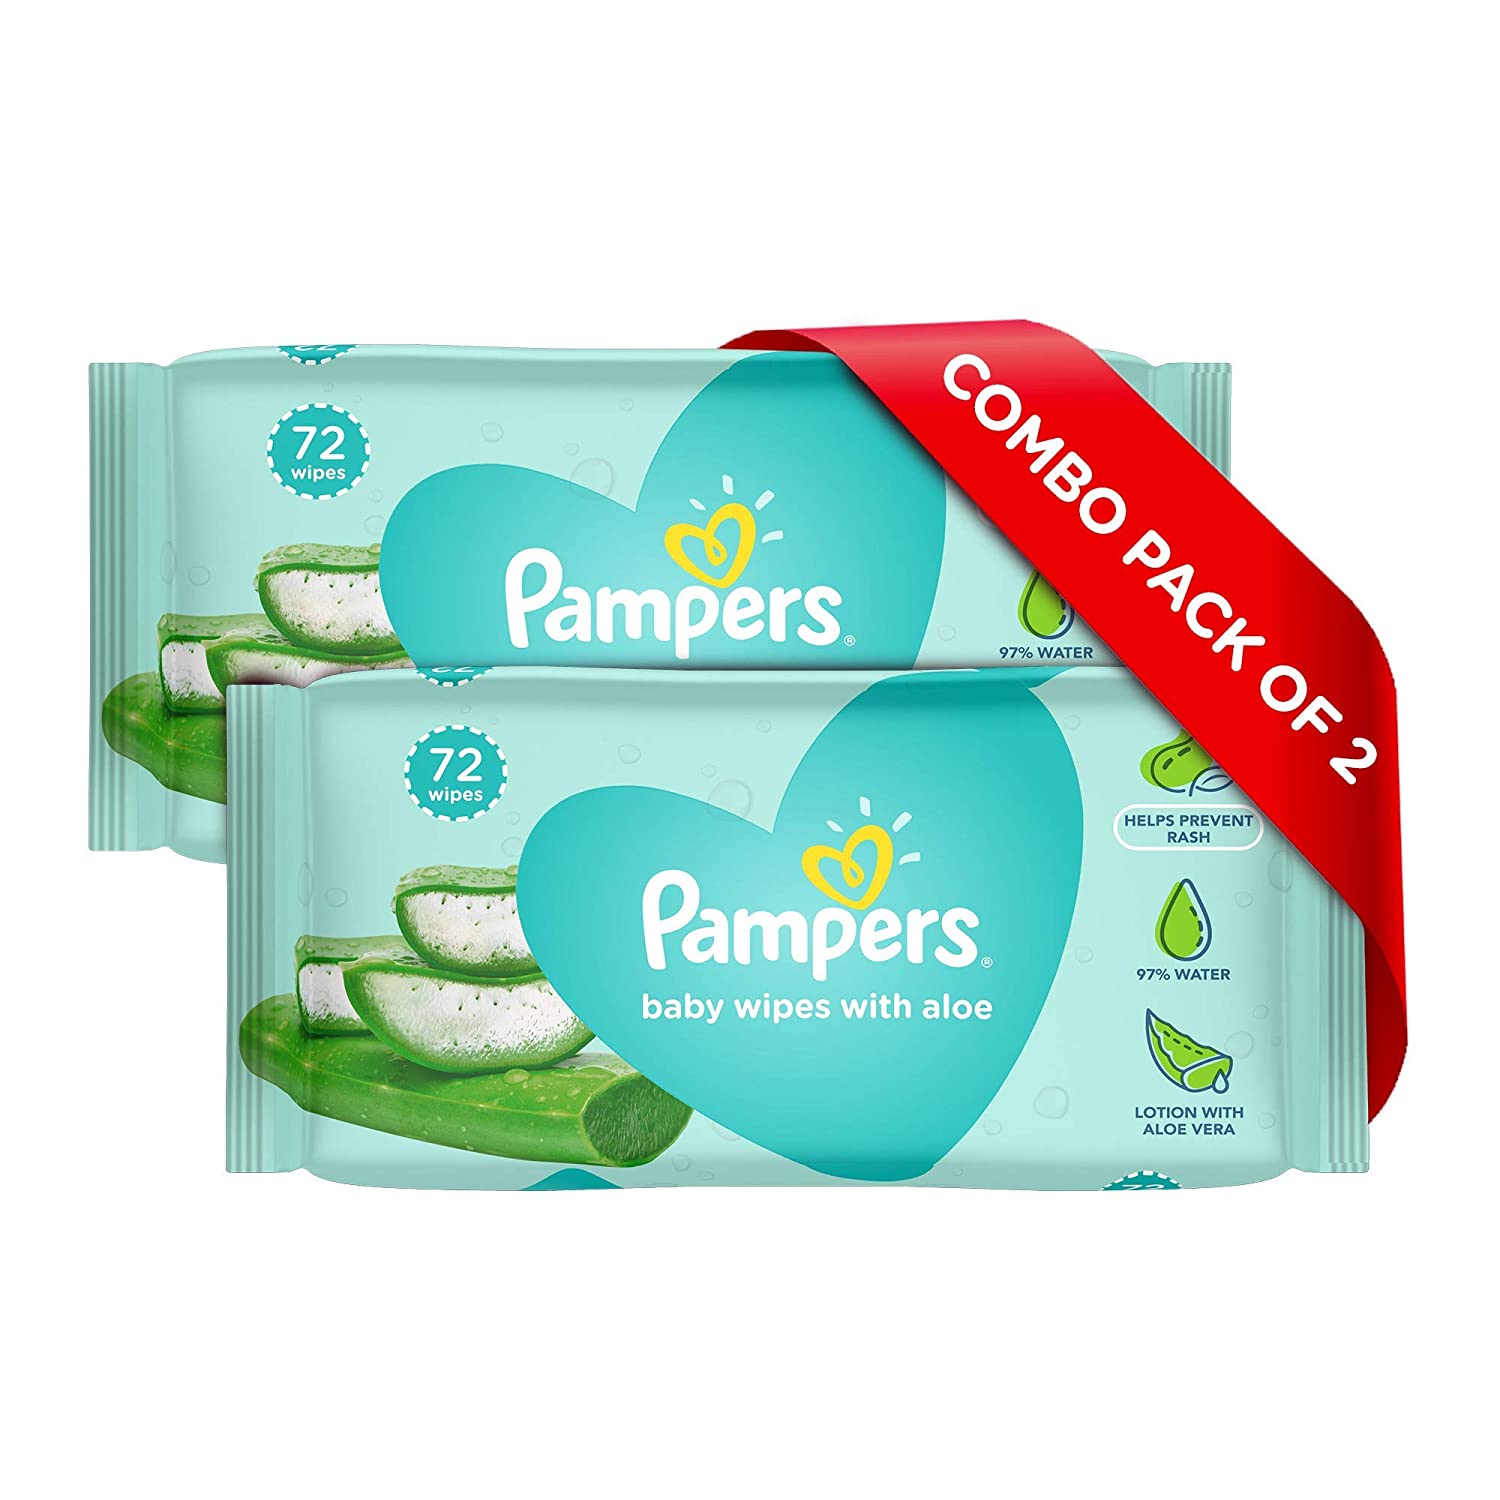 Buy Pampers Aloe Baby Wipes, 144 Count (2 x 72 Wipes) Online